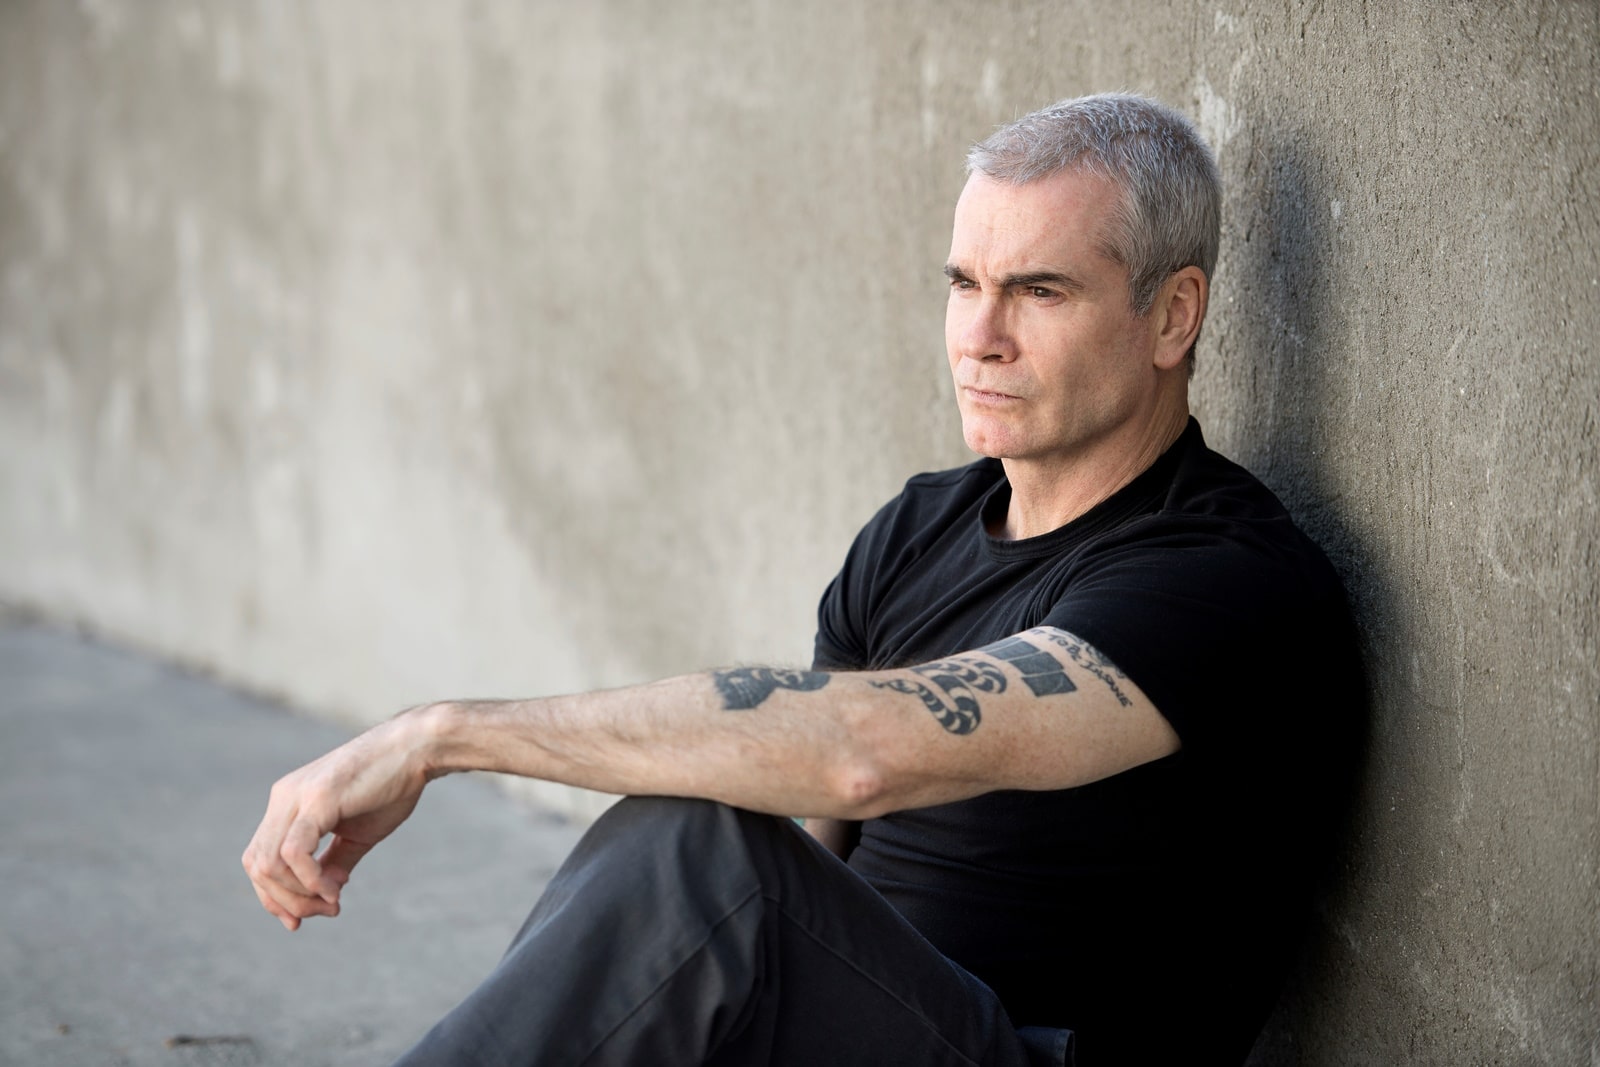 Henry Rollins on tour in Europe